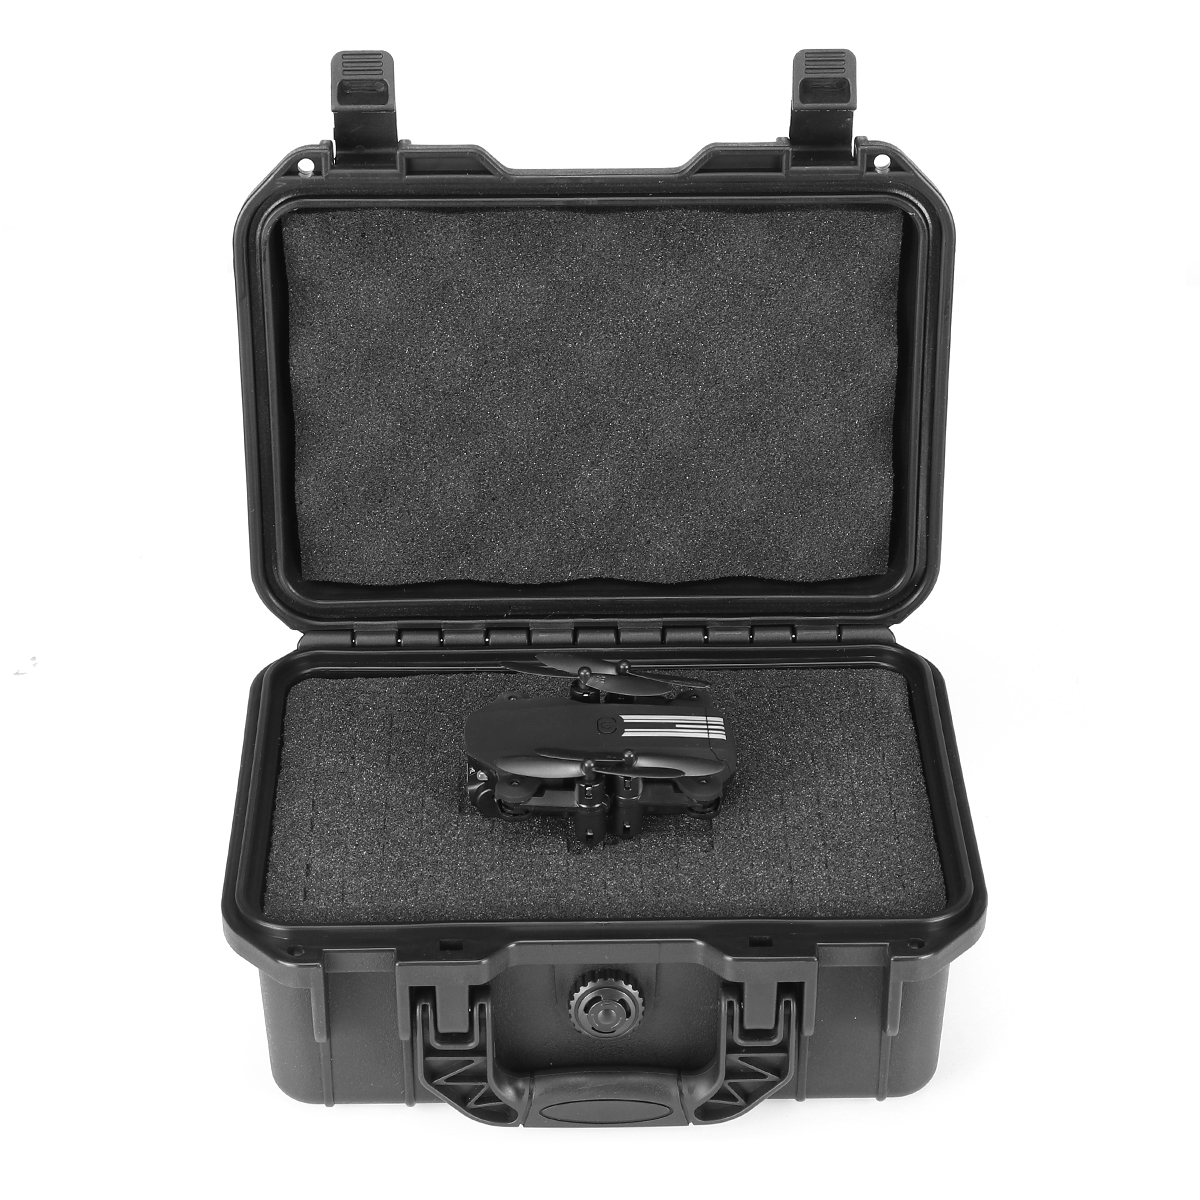 1PC-Shockproof-Sealed-Safety-Case-Toolbox-Airtight-Waterproof-Tool-Box-Instrument-Case-Dry-Box-with--1915433-3